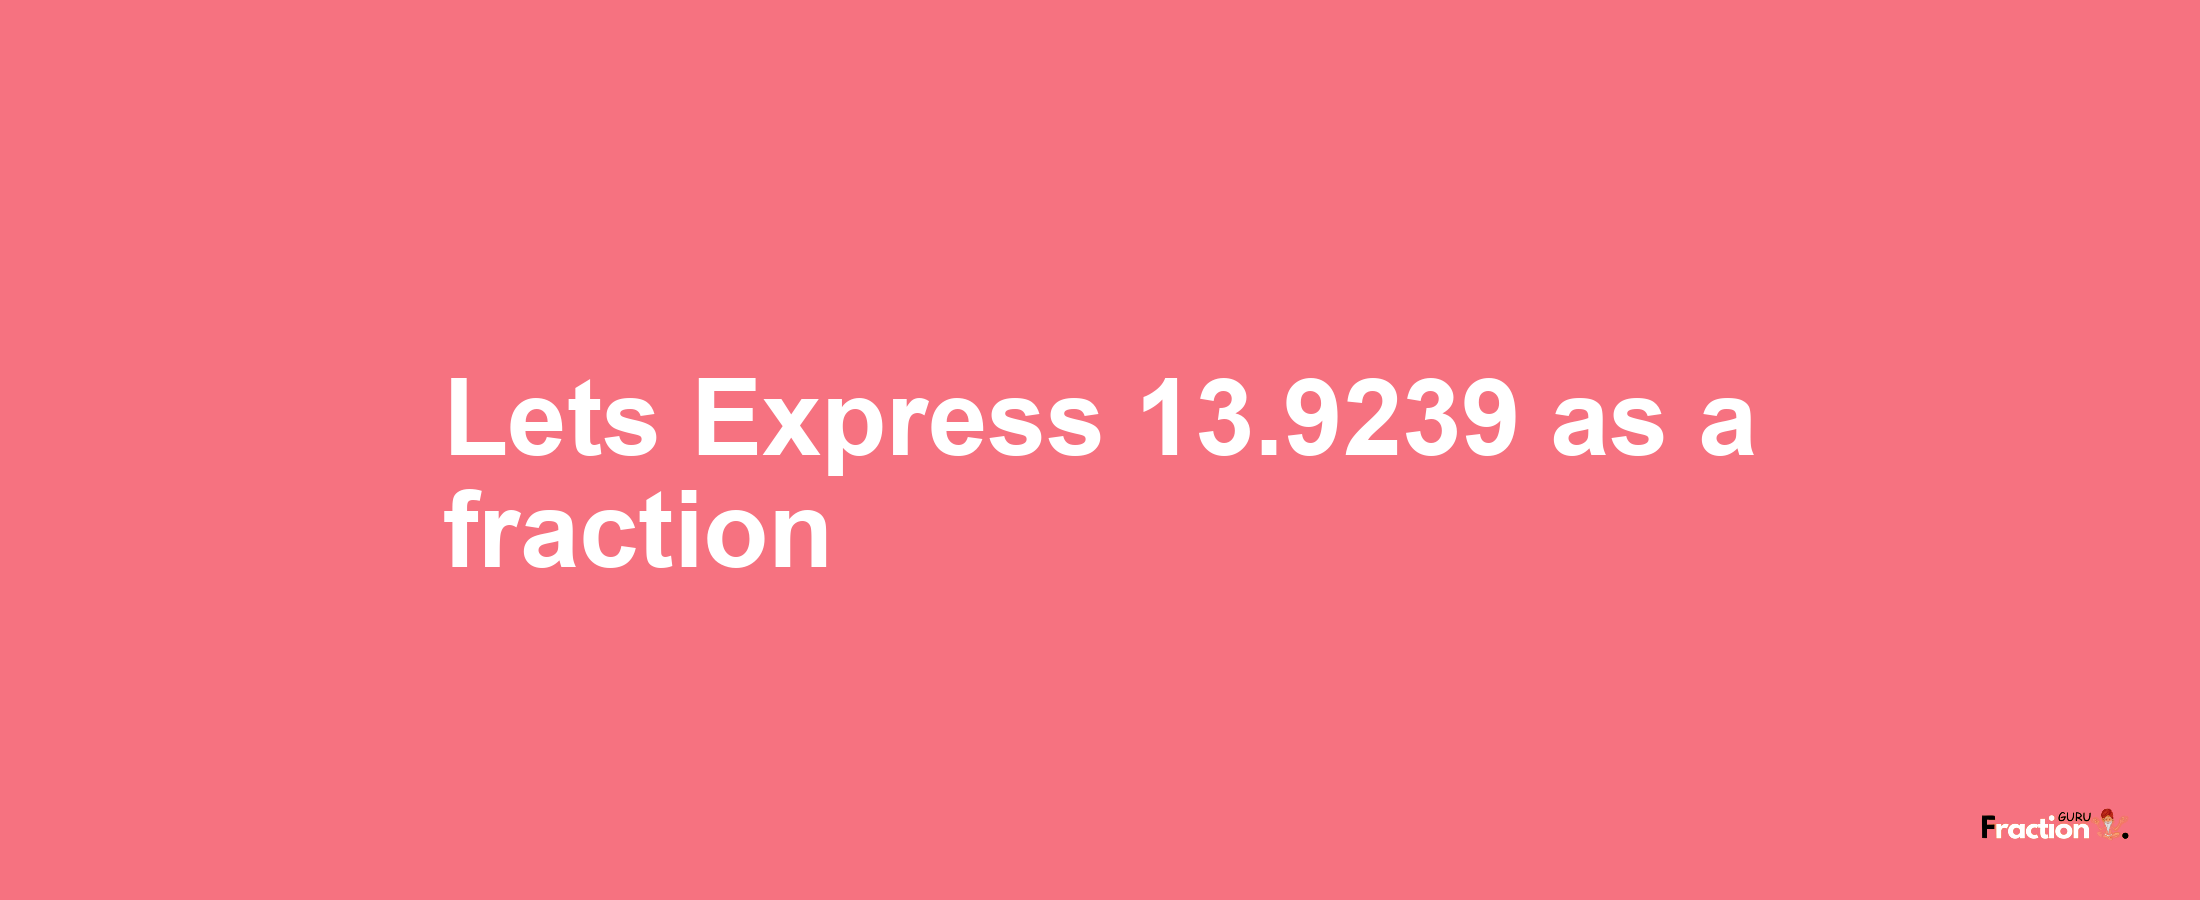 Lets Express 13.9239 as afraction